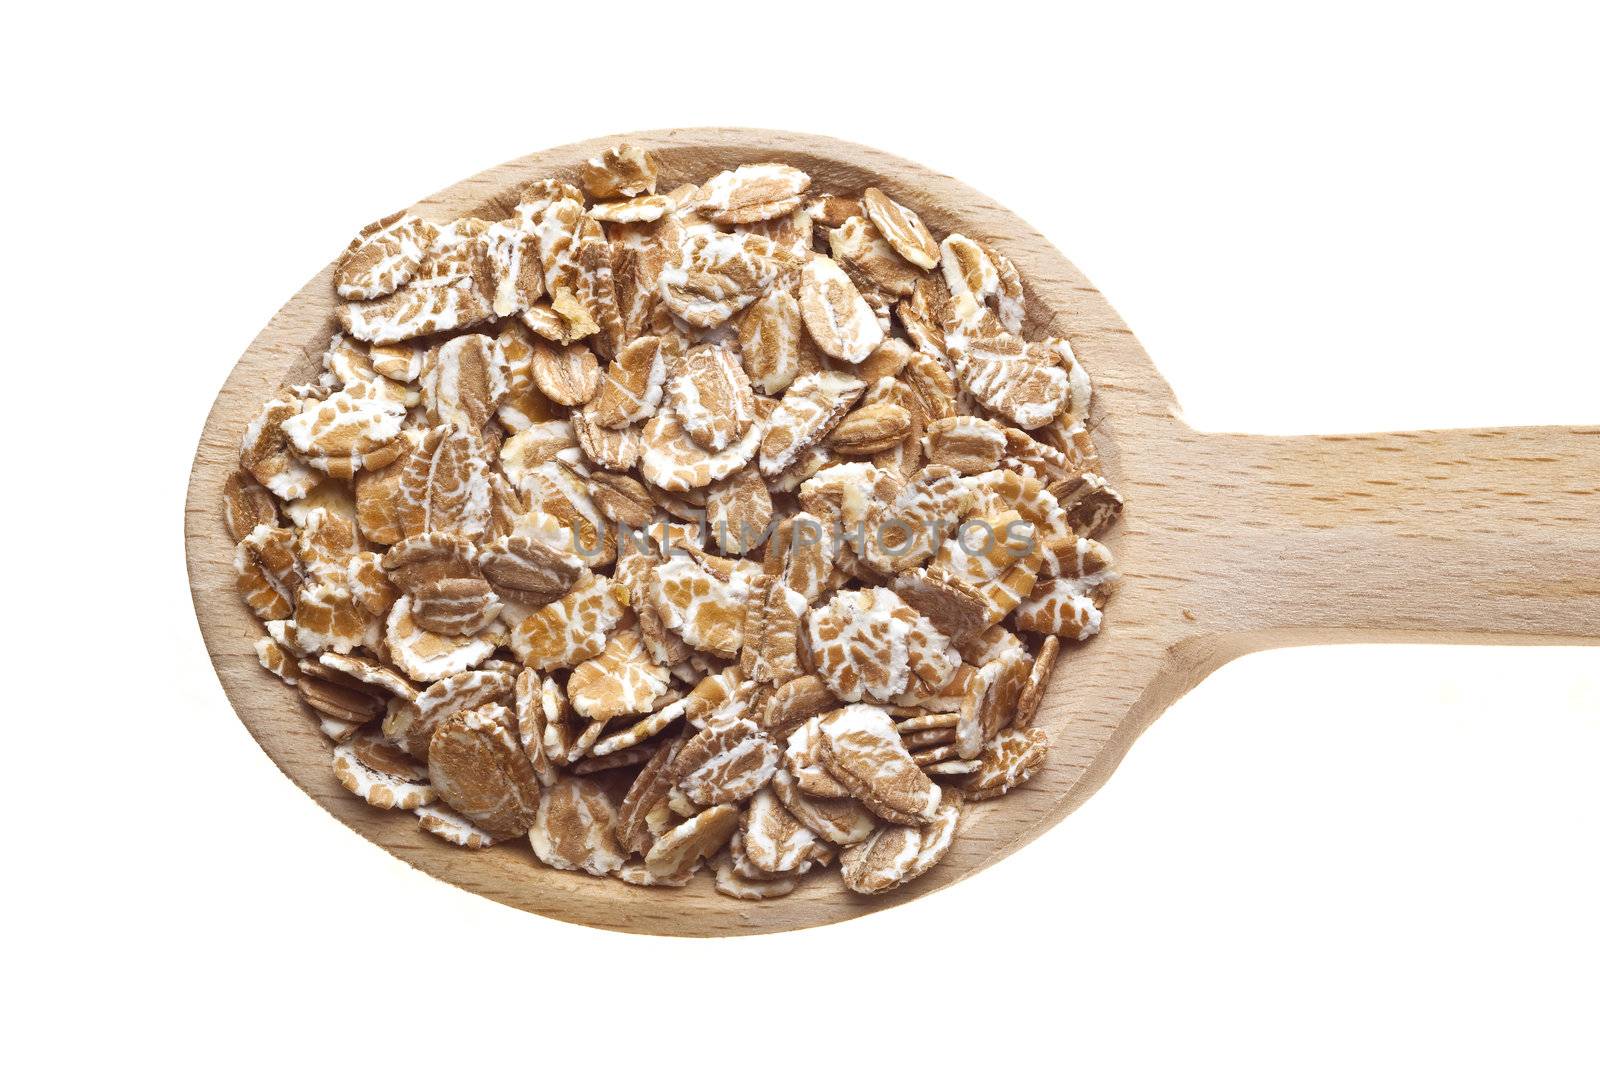 Herbs and spices on wooden spoons - corn flakes by adamr